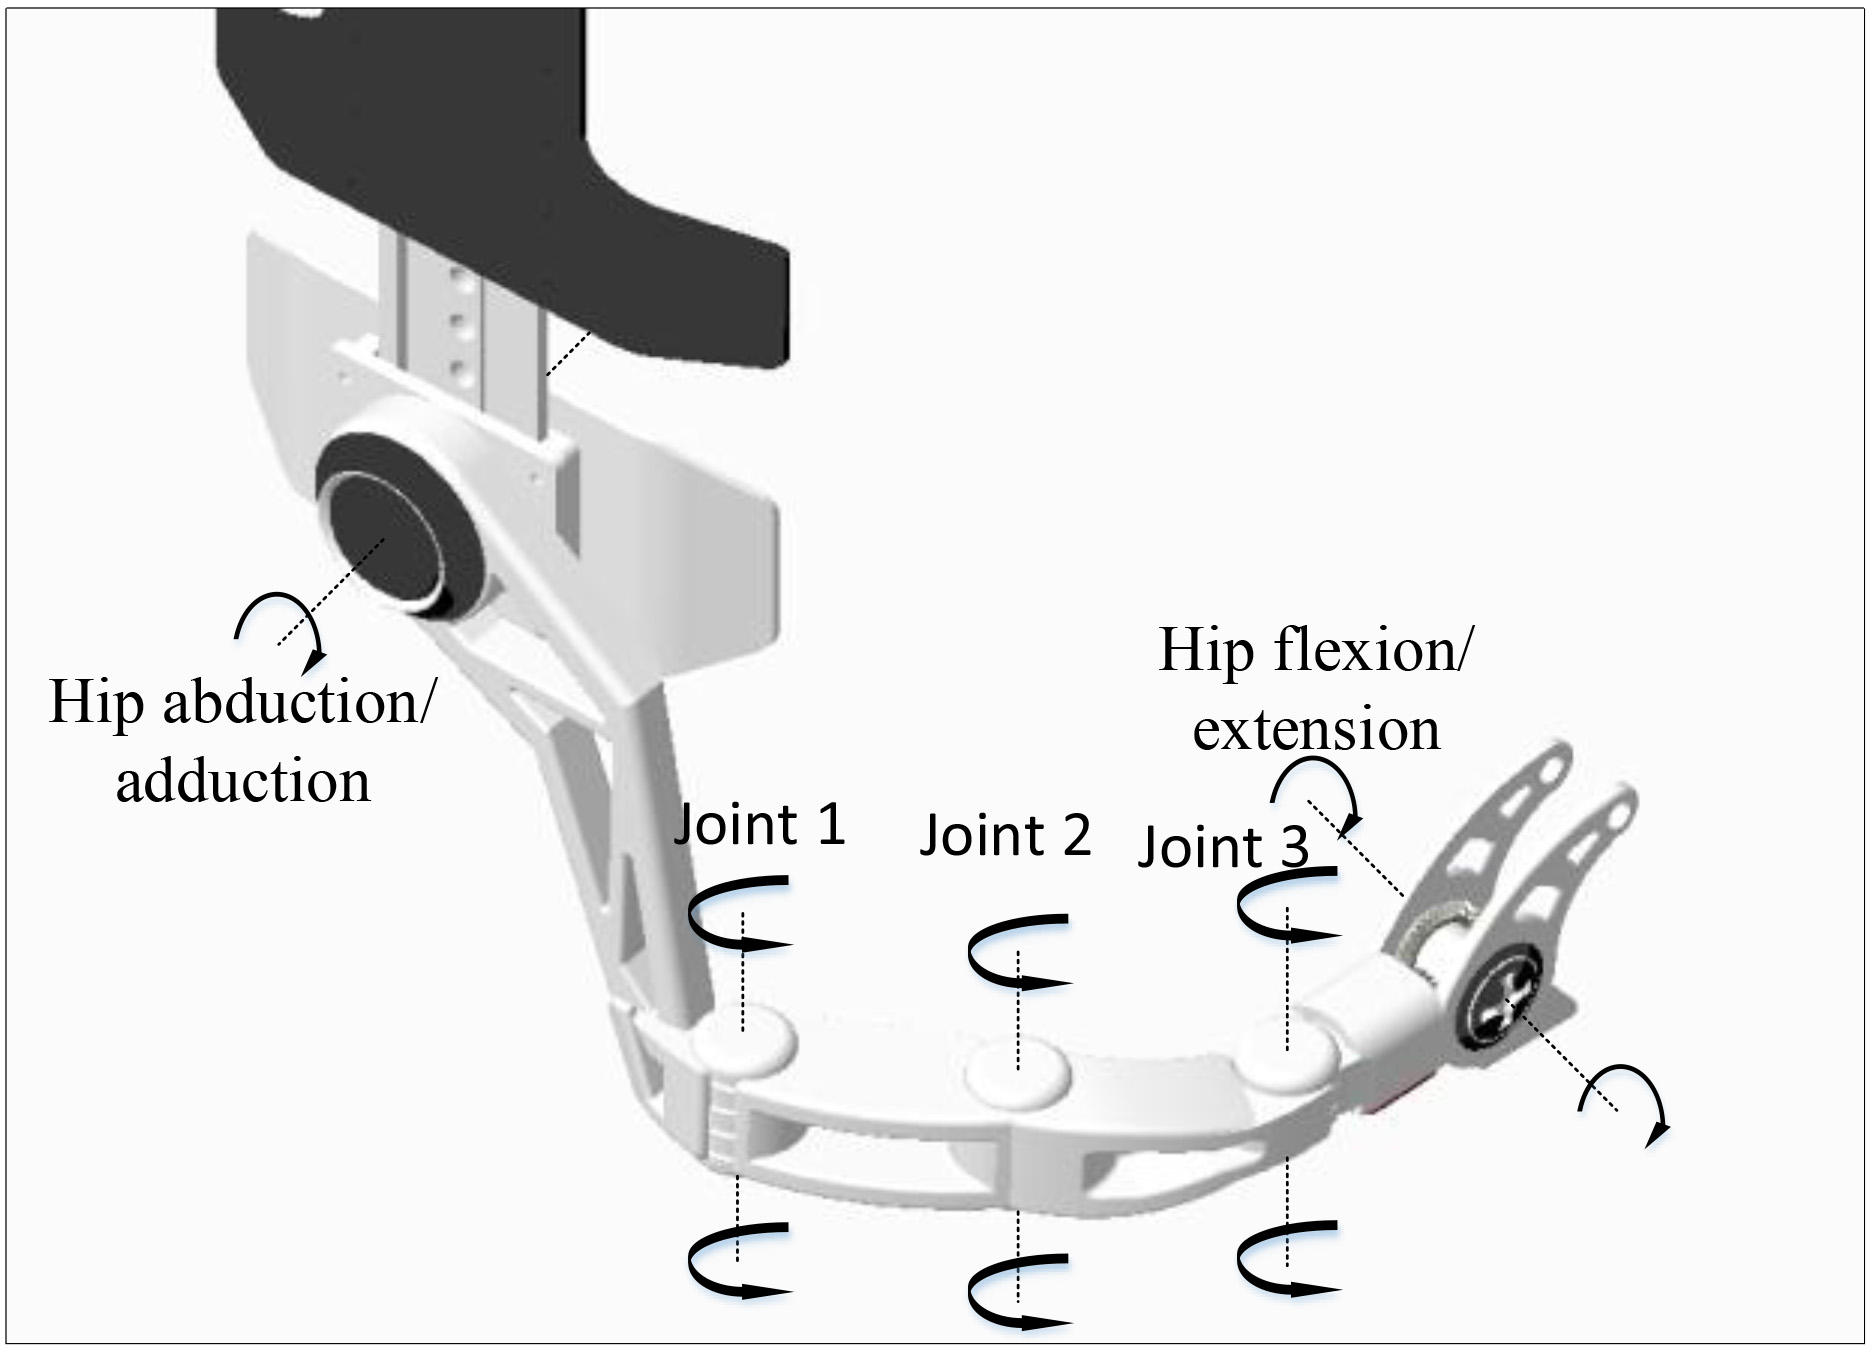 Hip structure.